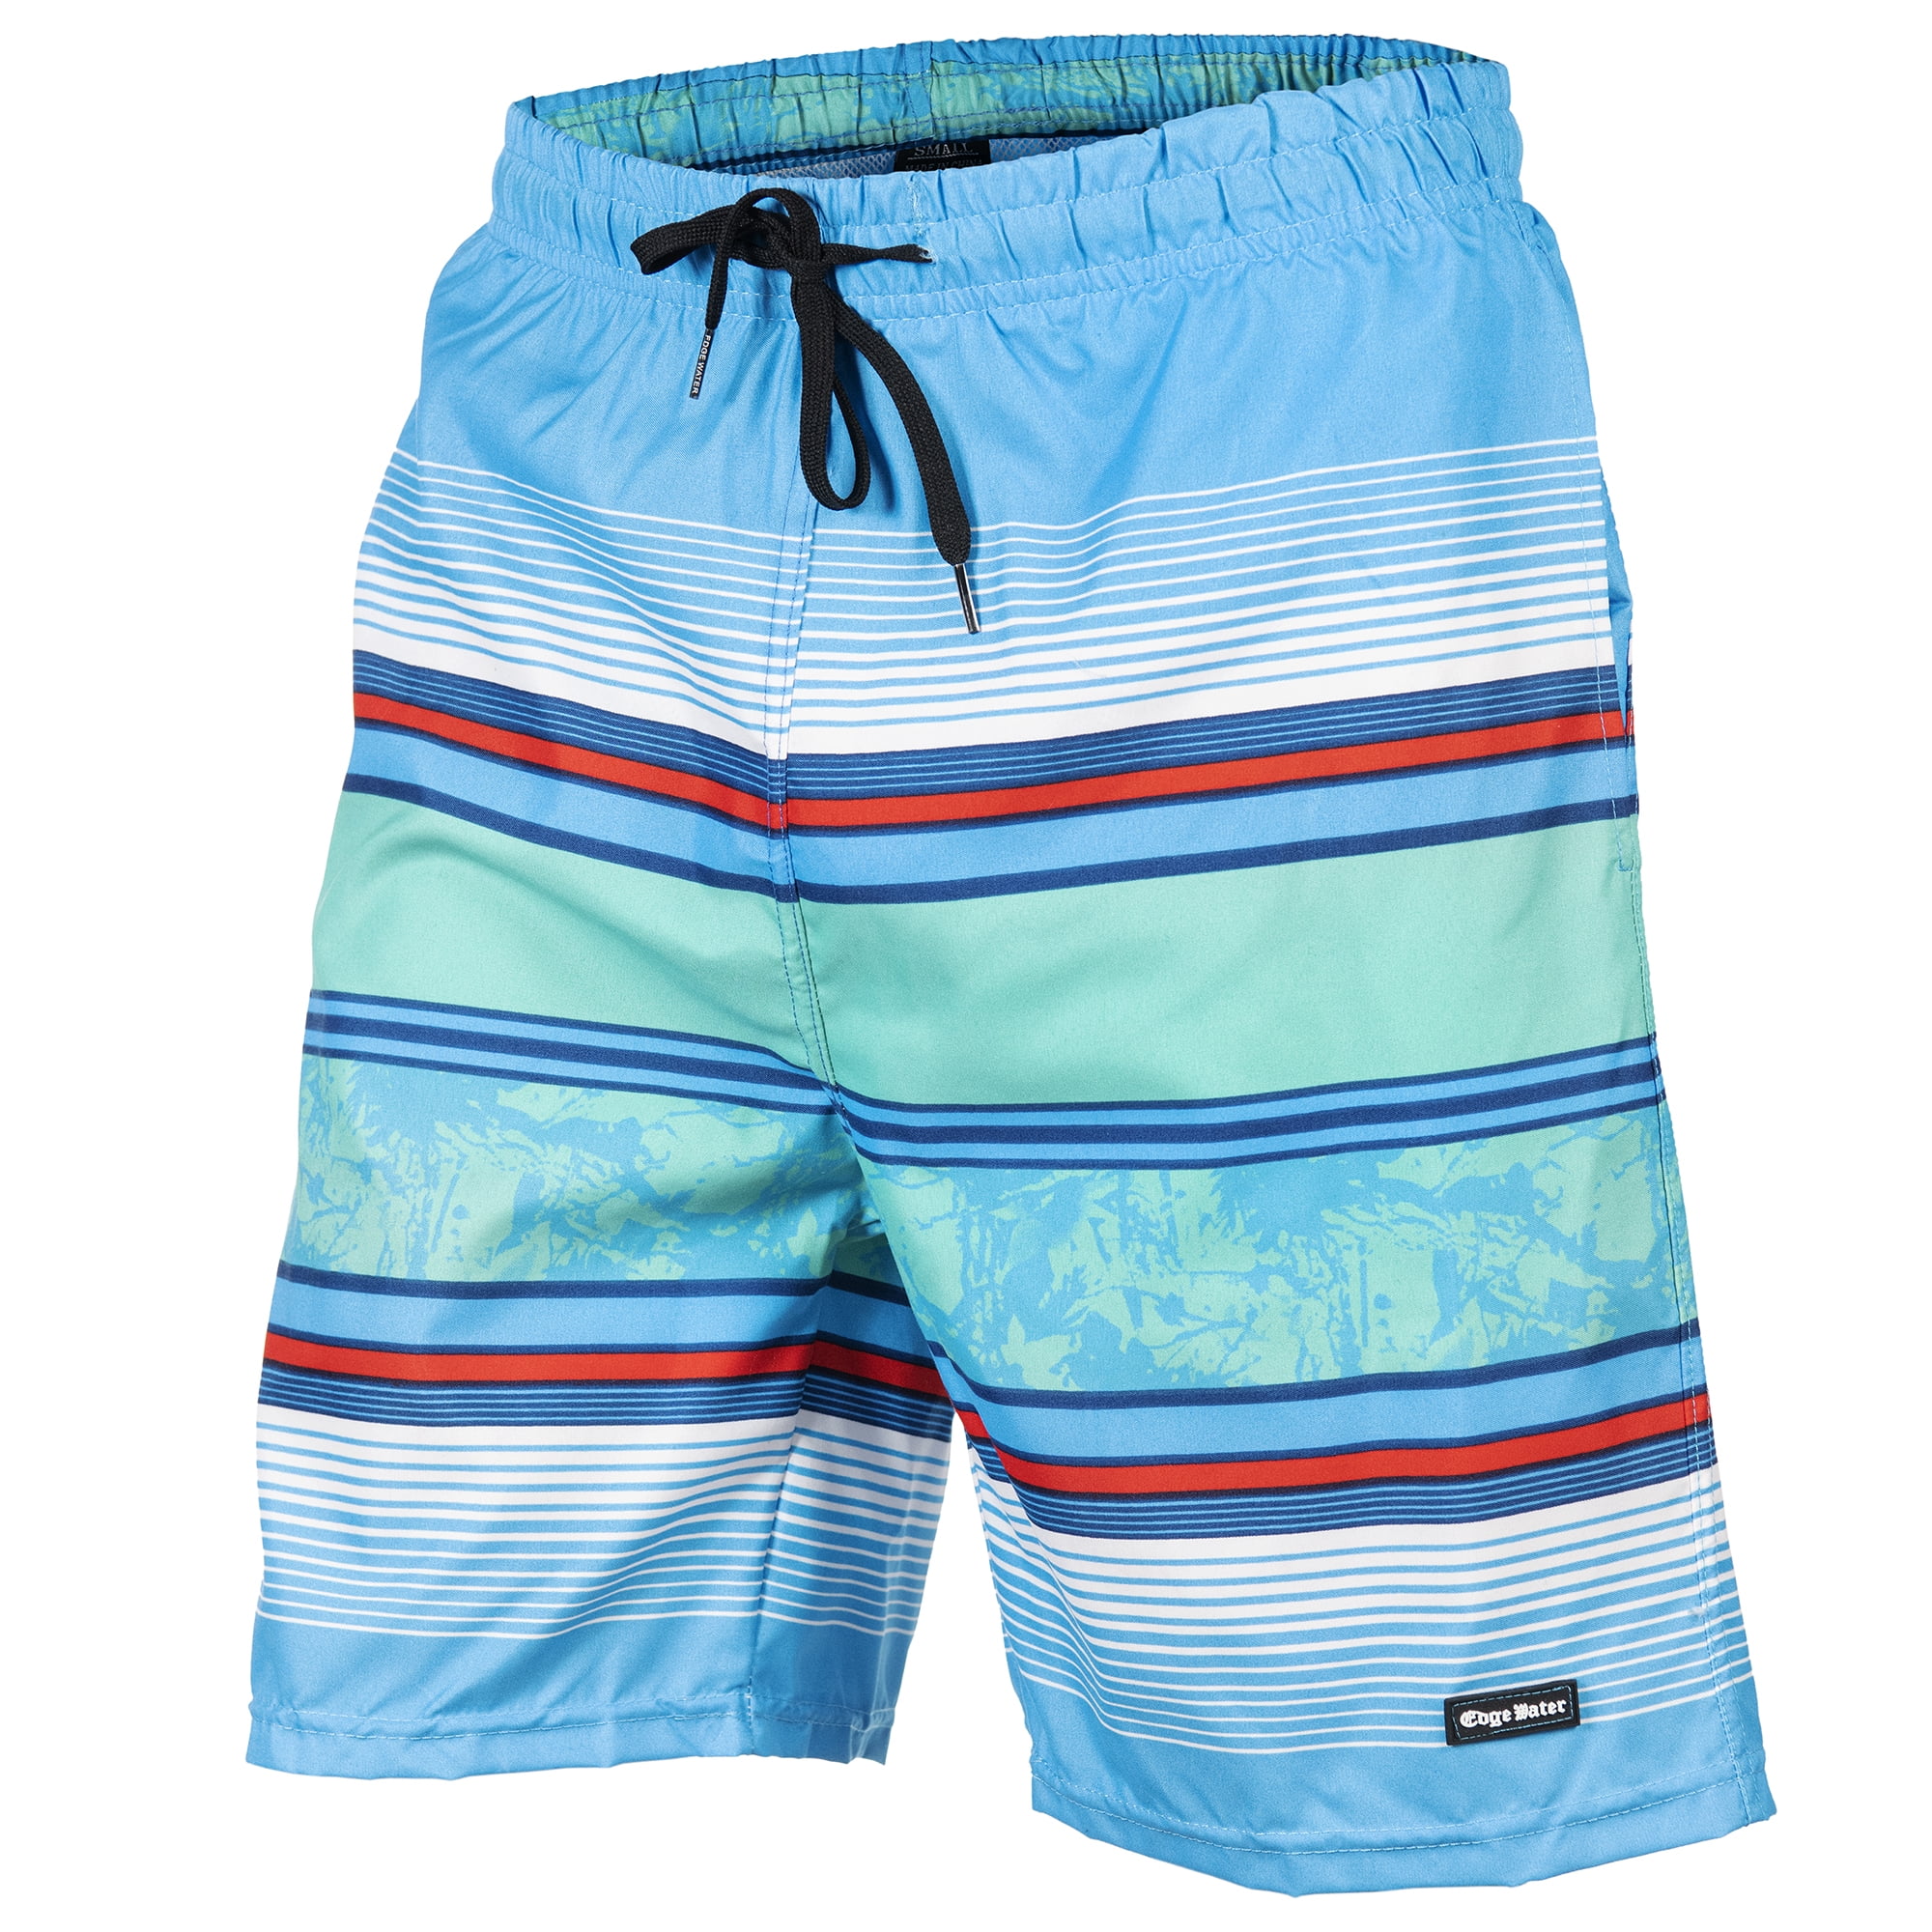 Mens Swim Trunks with Mesh Lining Pockets Colorful Rings Boys Polyester Board Shorts Swimwear